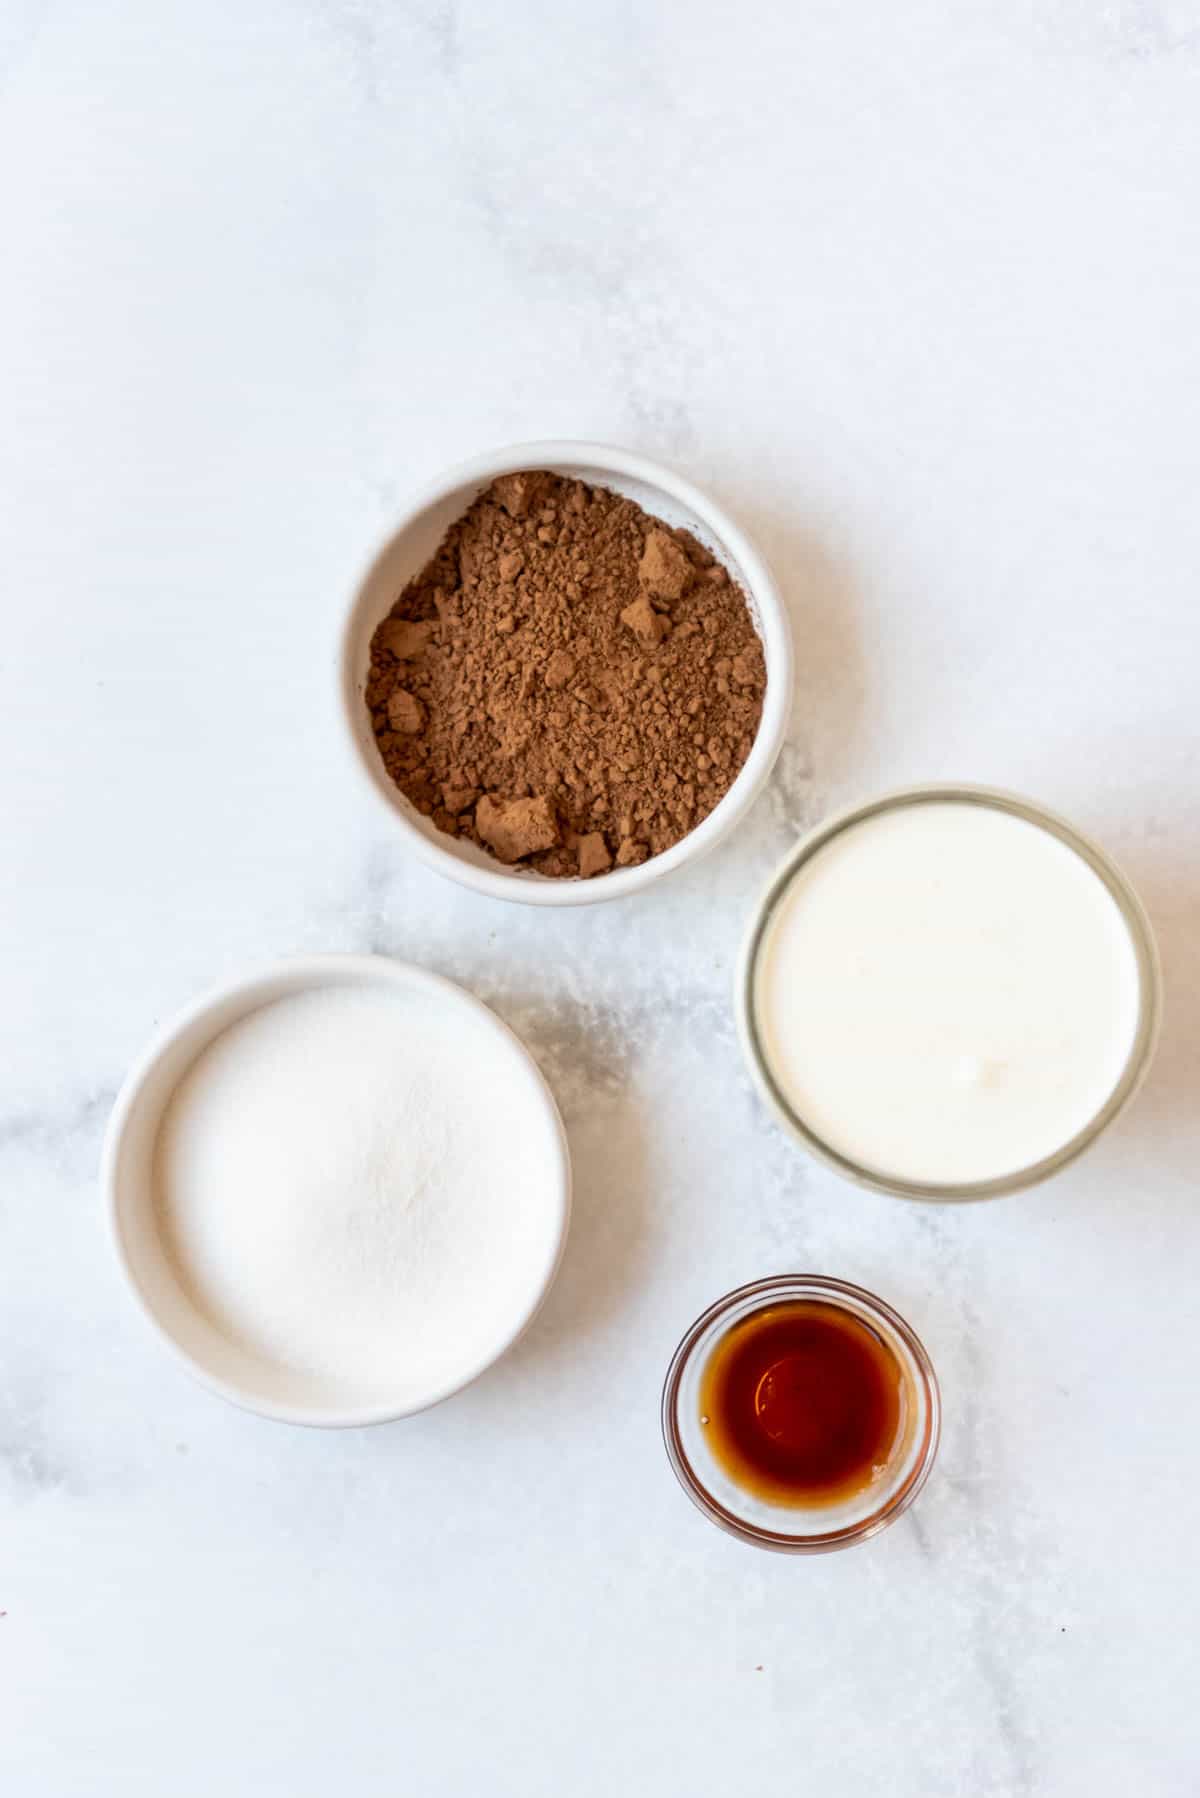 Cocoa powder, sugar, heavy cream, and vanilla extract in separate bowls on a white surface.